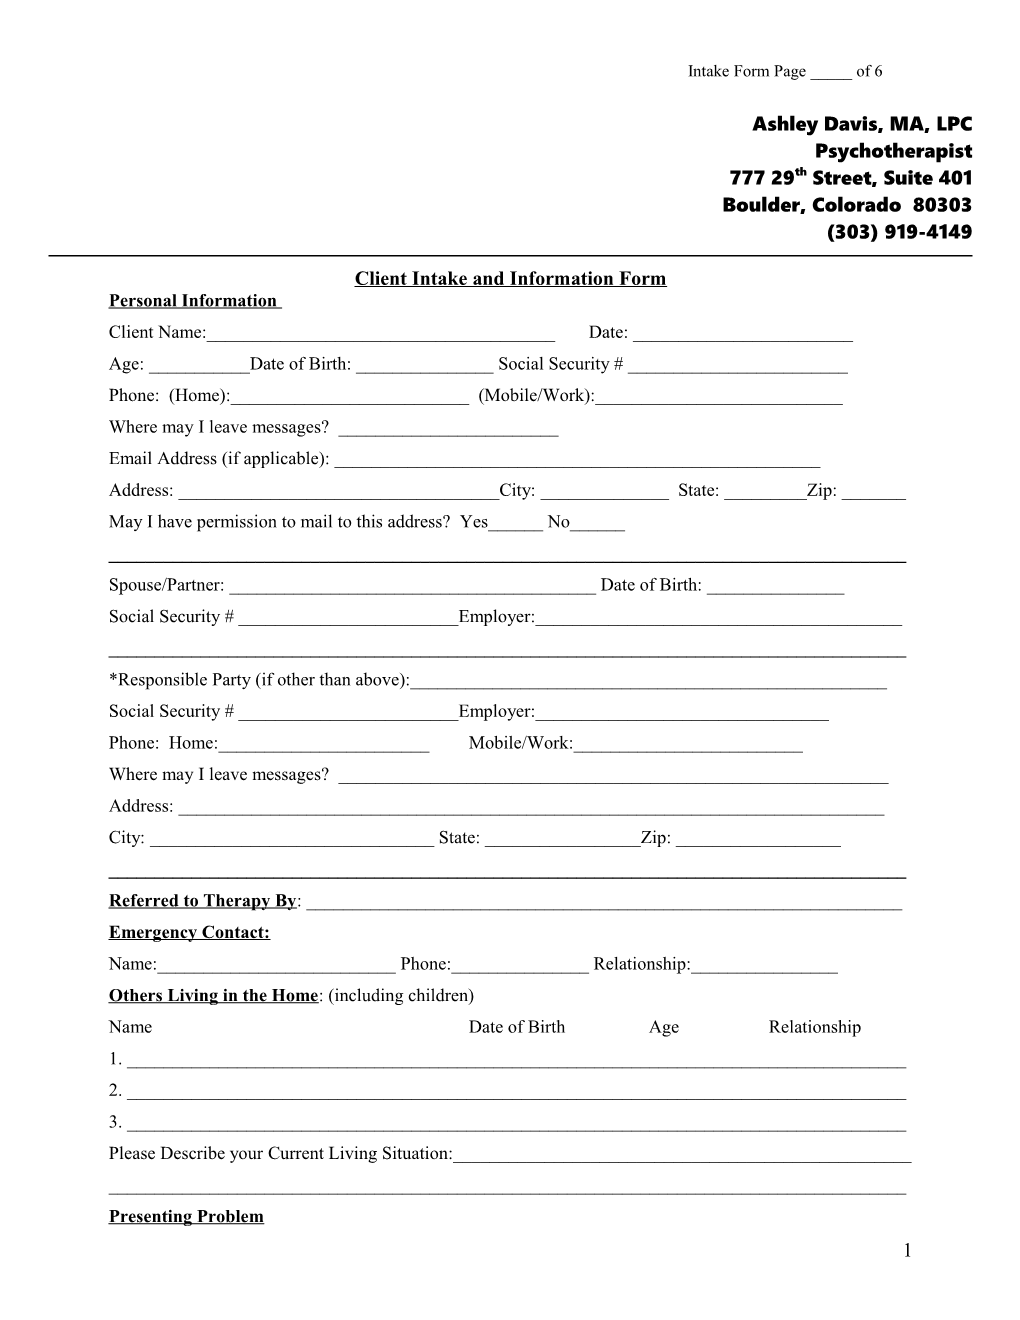 Client Intake and Information Form